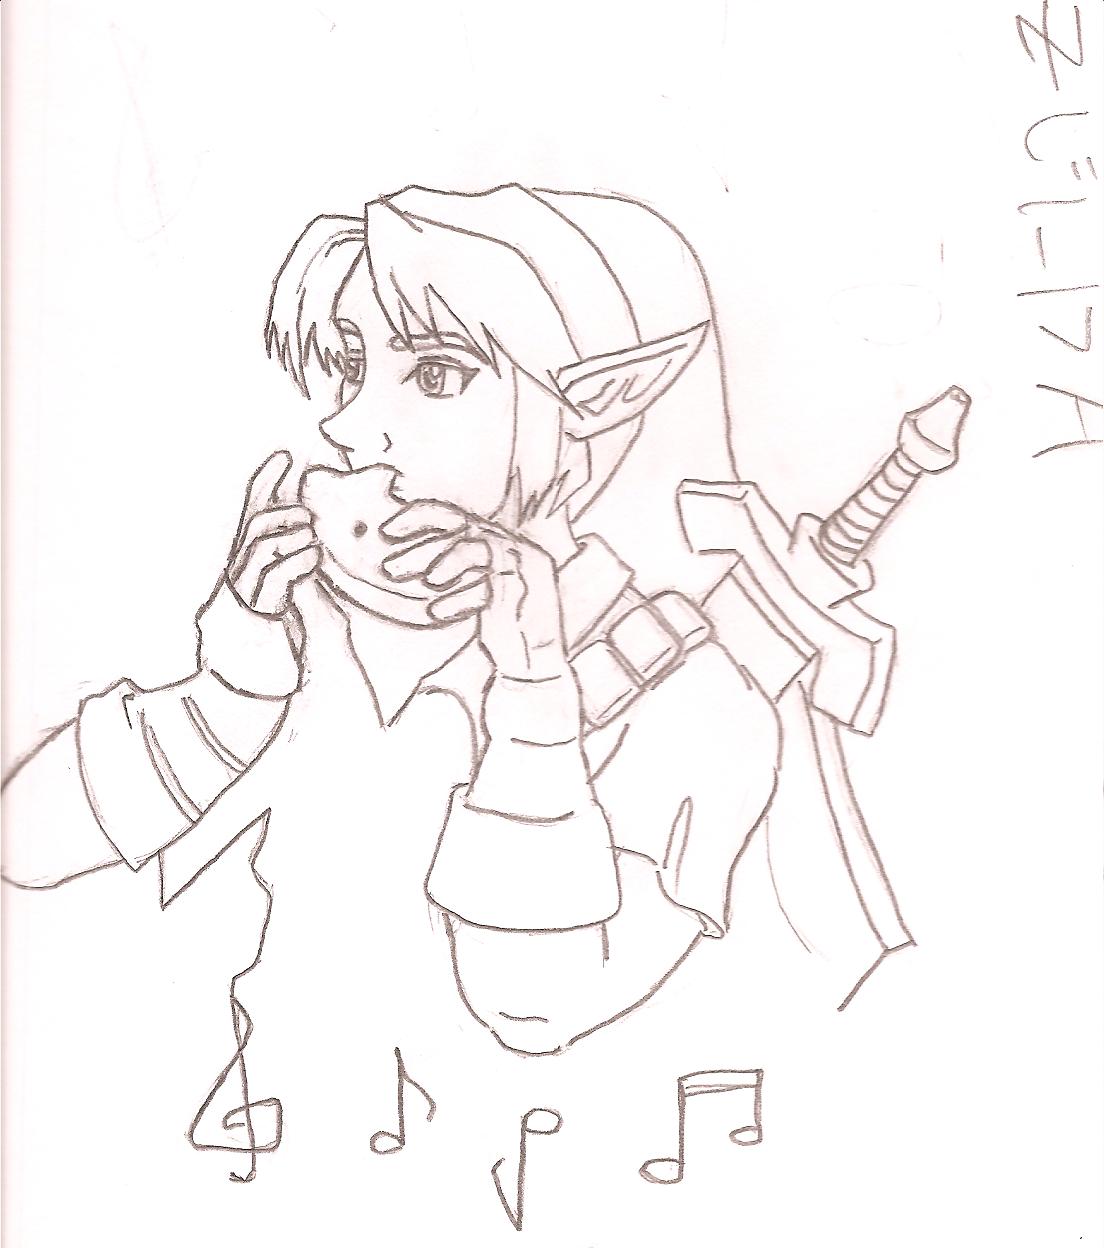 Link playing music by Kutless